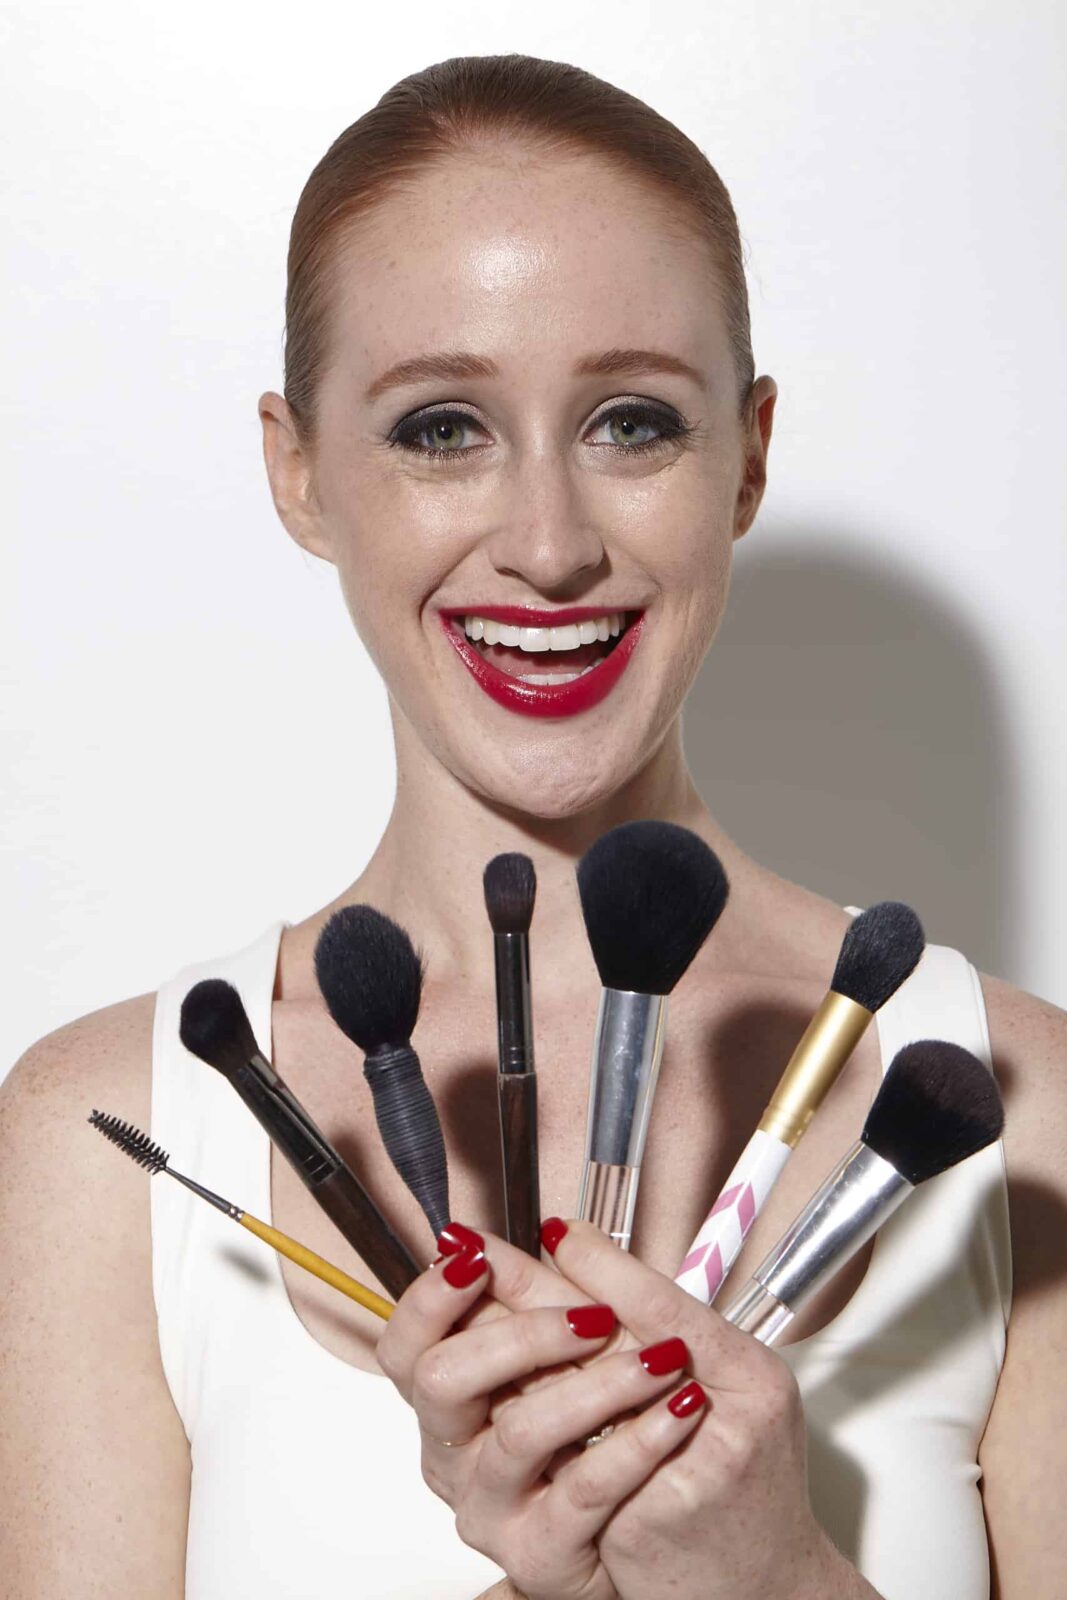 How to Clean Your Makeup Brushes and Tools